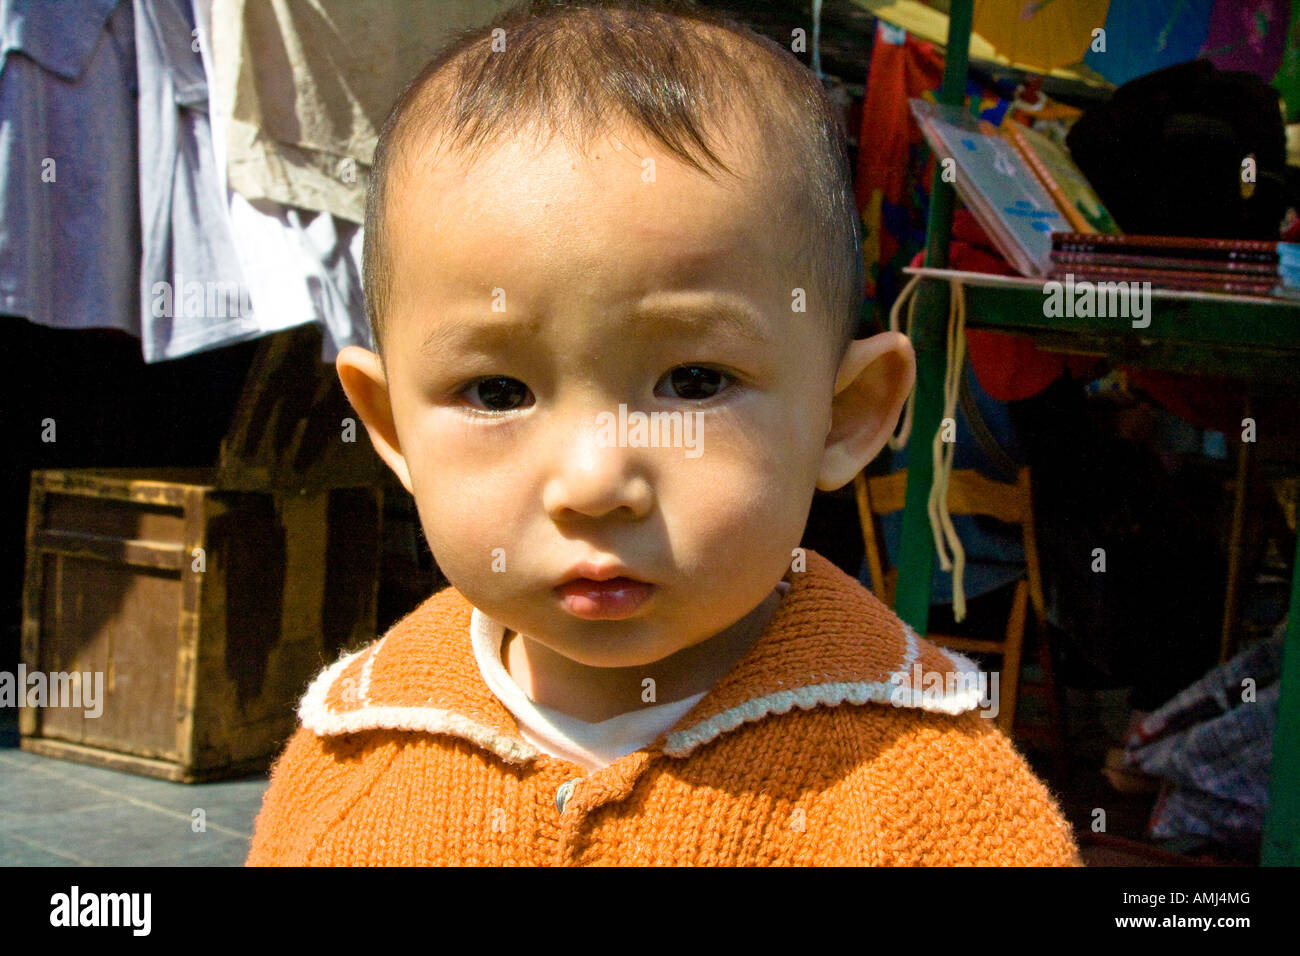 Adorable Young Chinese Boy West Street or Xi Jie Yangshuo China Stock Photo